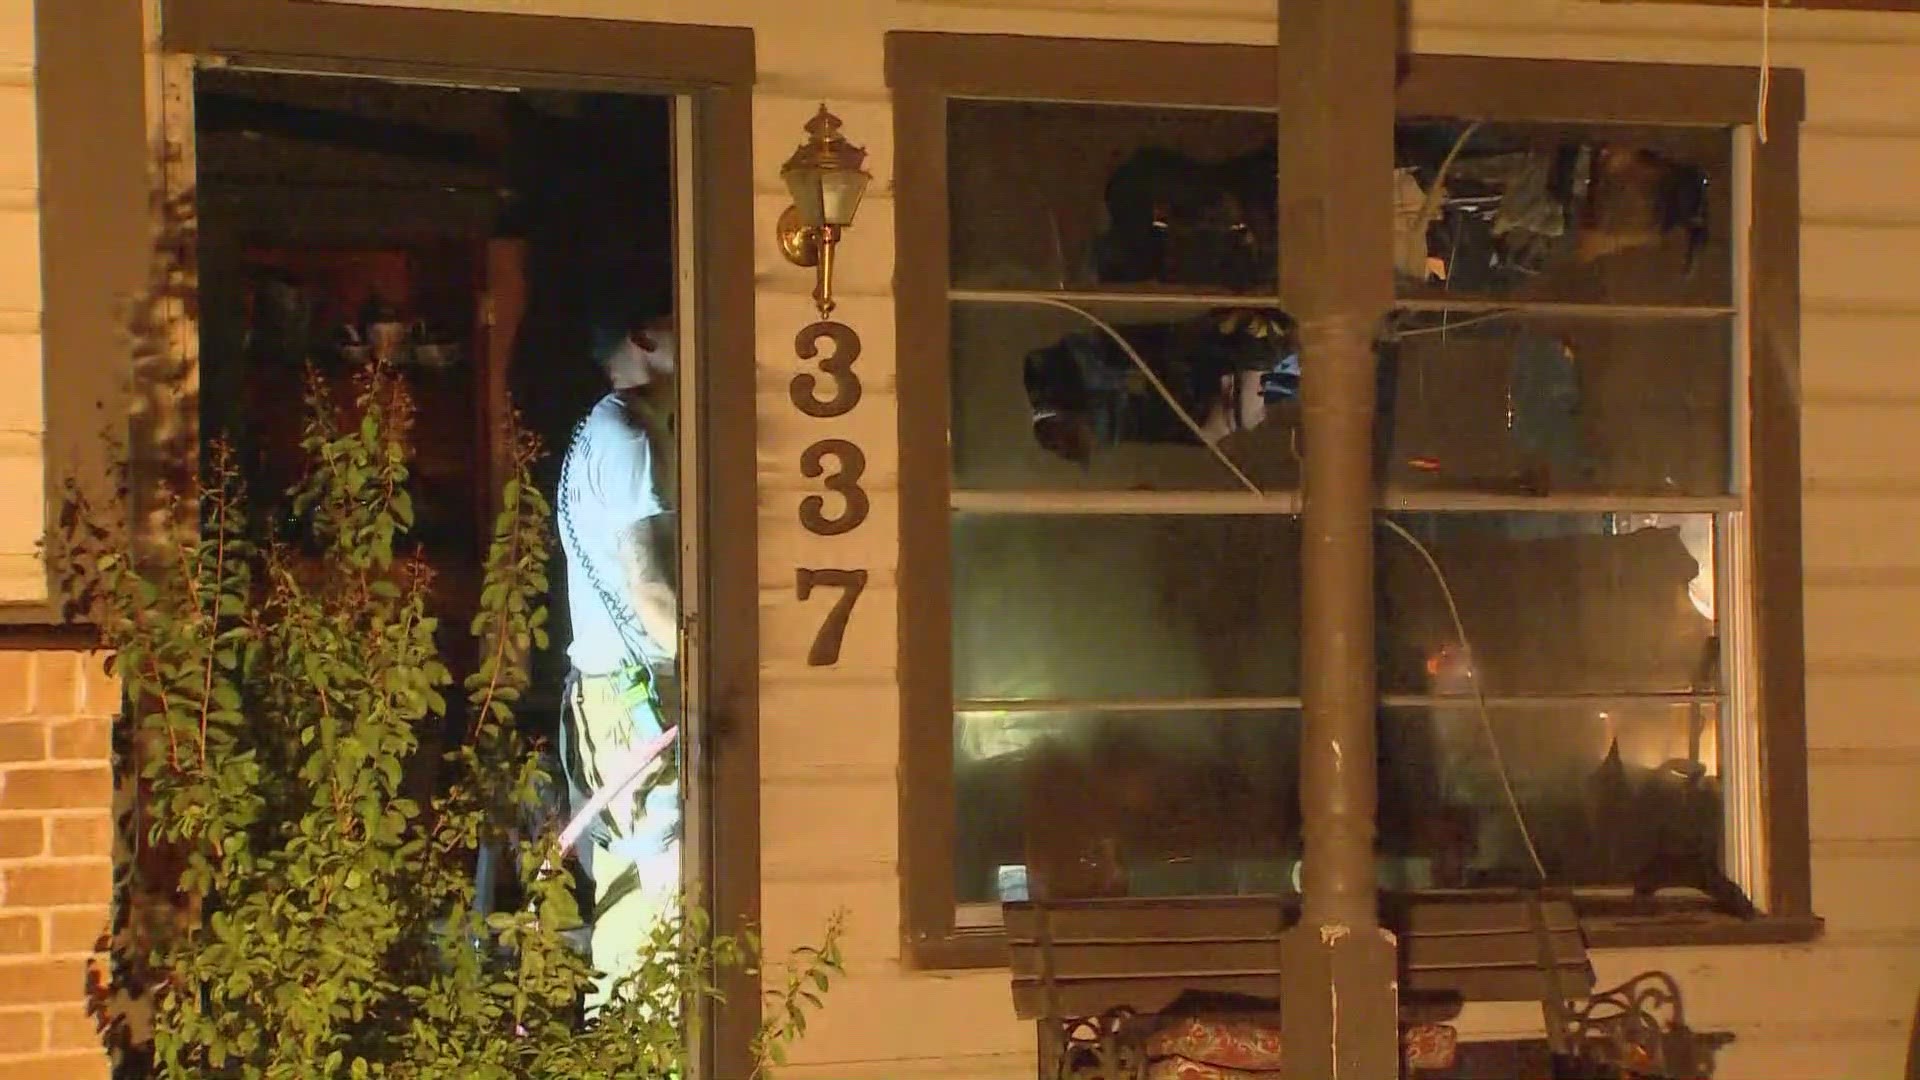 One person has died in a house fire in Fort Worth early Tuesday, officials say.